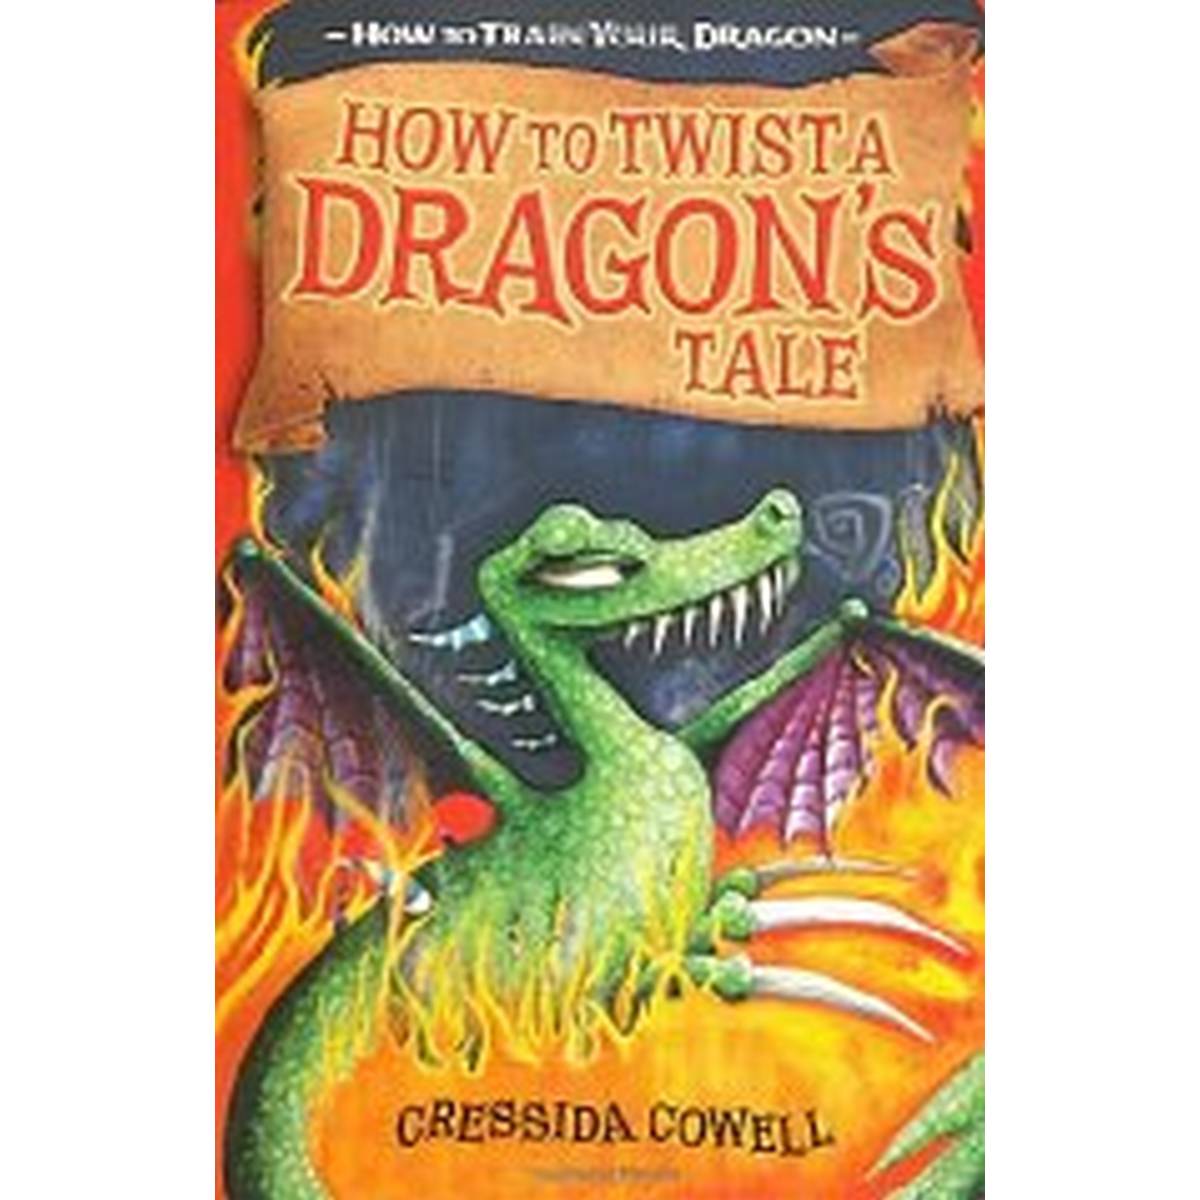 How to Twist a Dragon's Tale (How to train your Dragon)